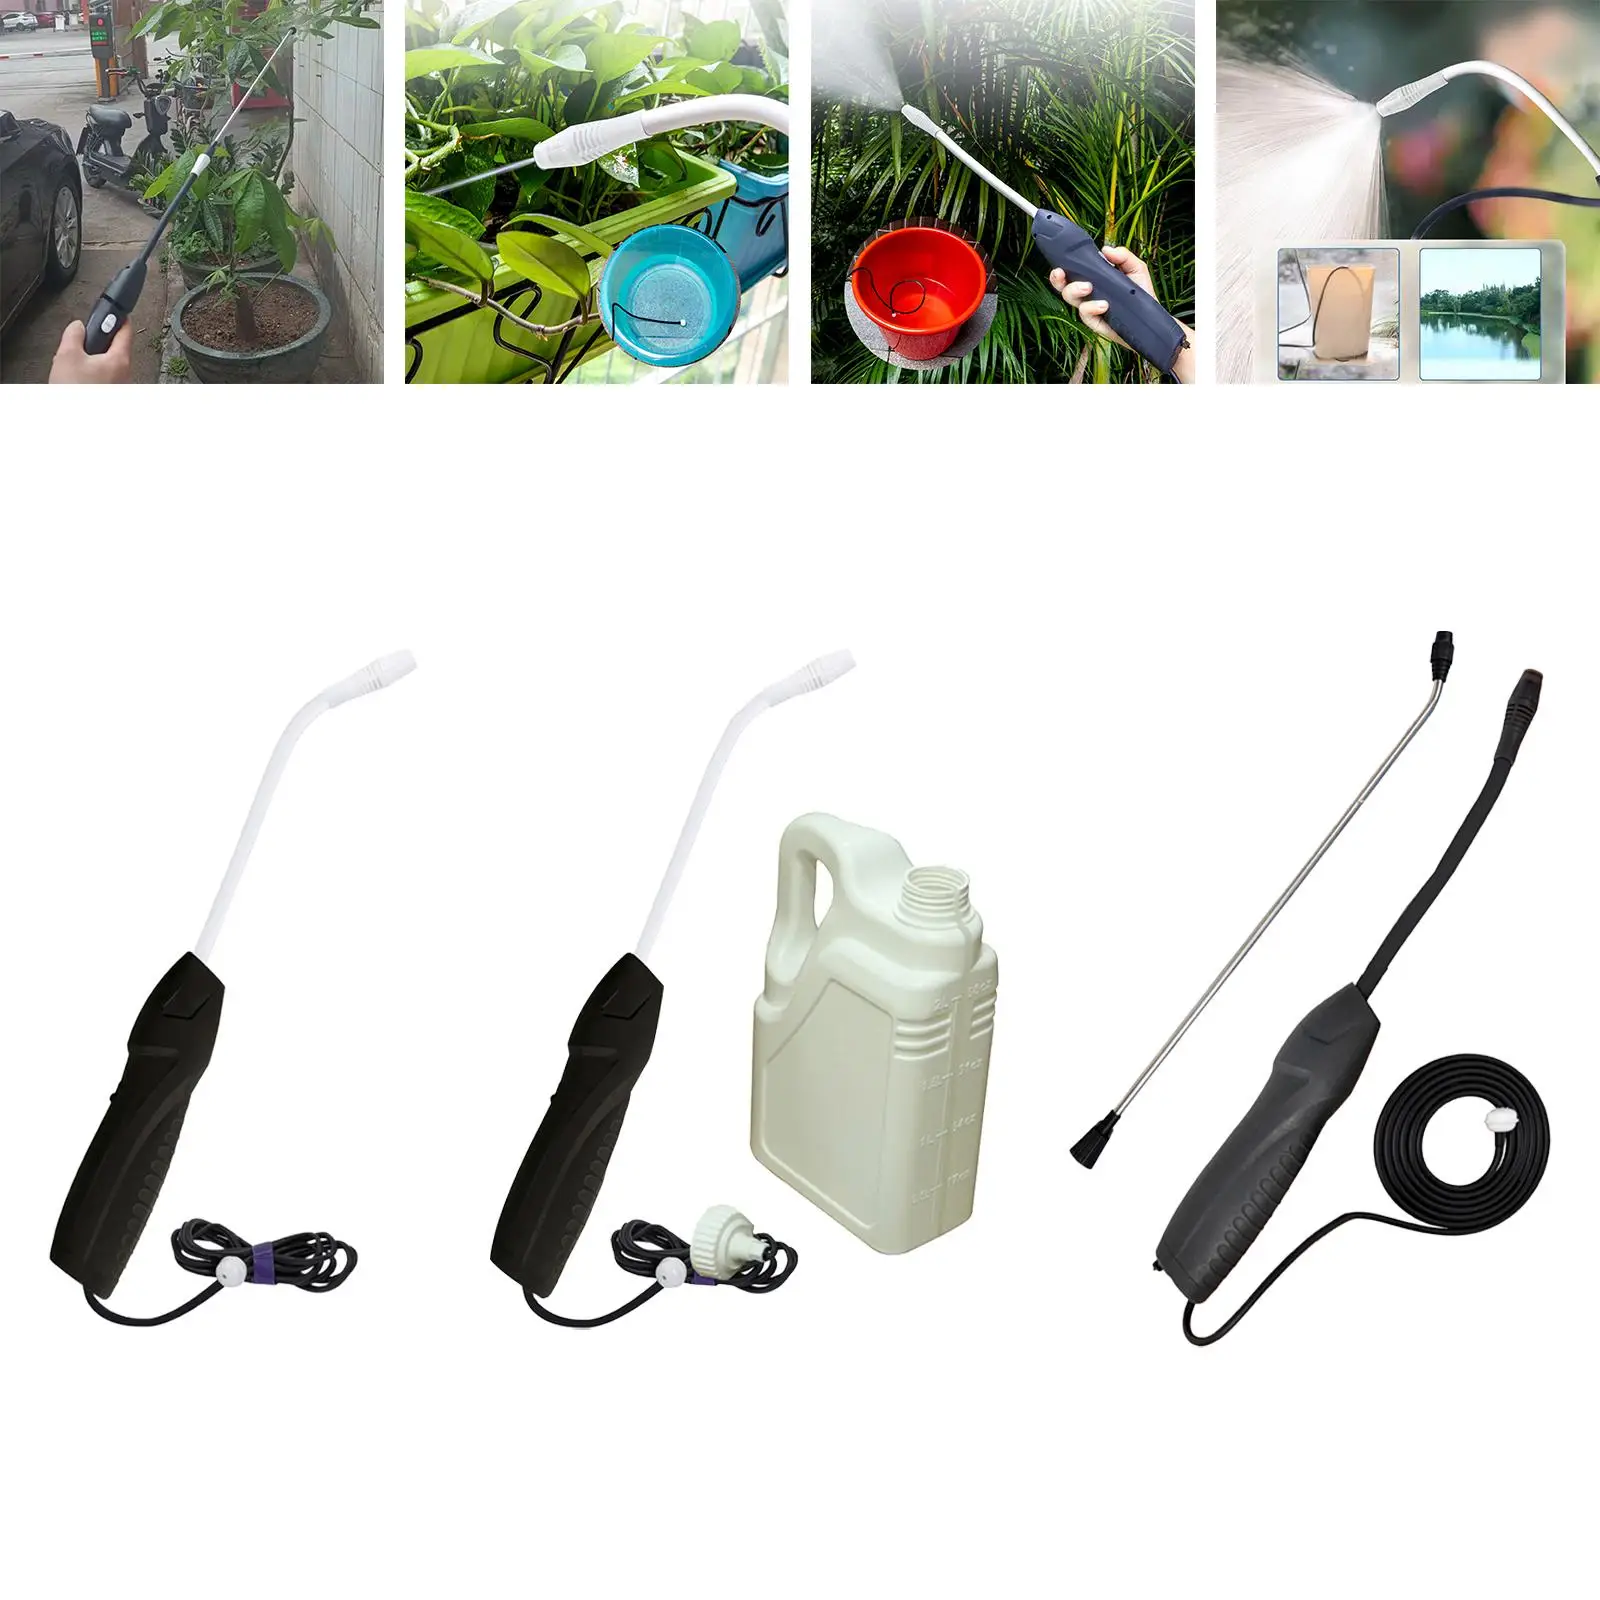 Rechargeable Spray Mister and Water Hose Flexible Electric Sprayer for Garden Outdoor Car Washing Plant Watering Yard